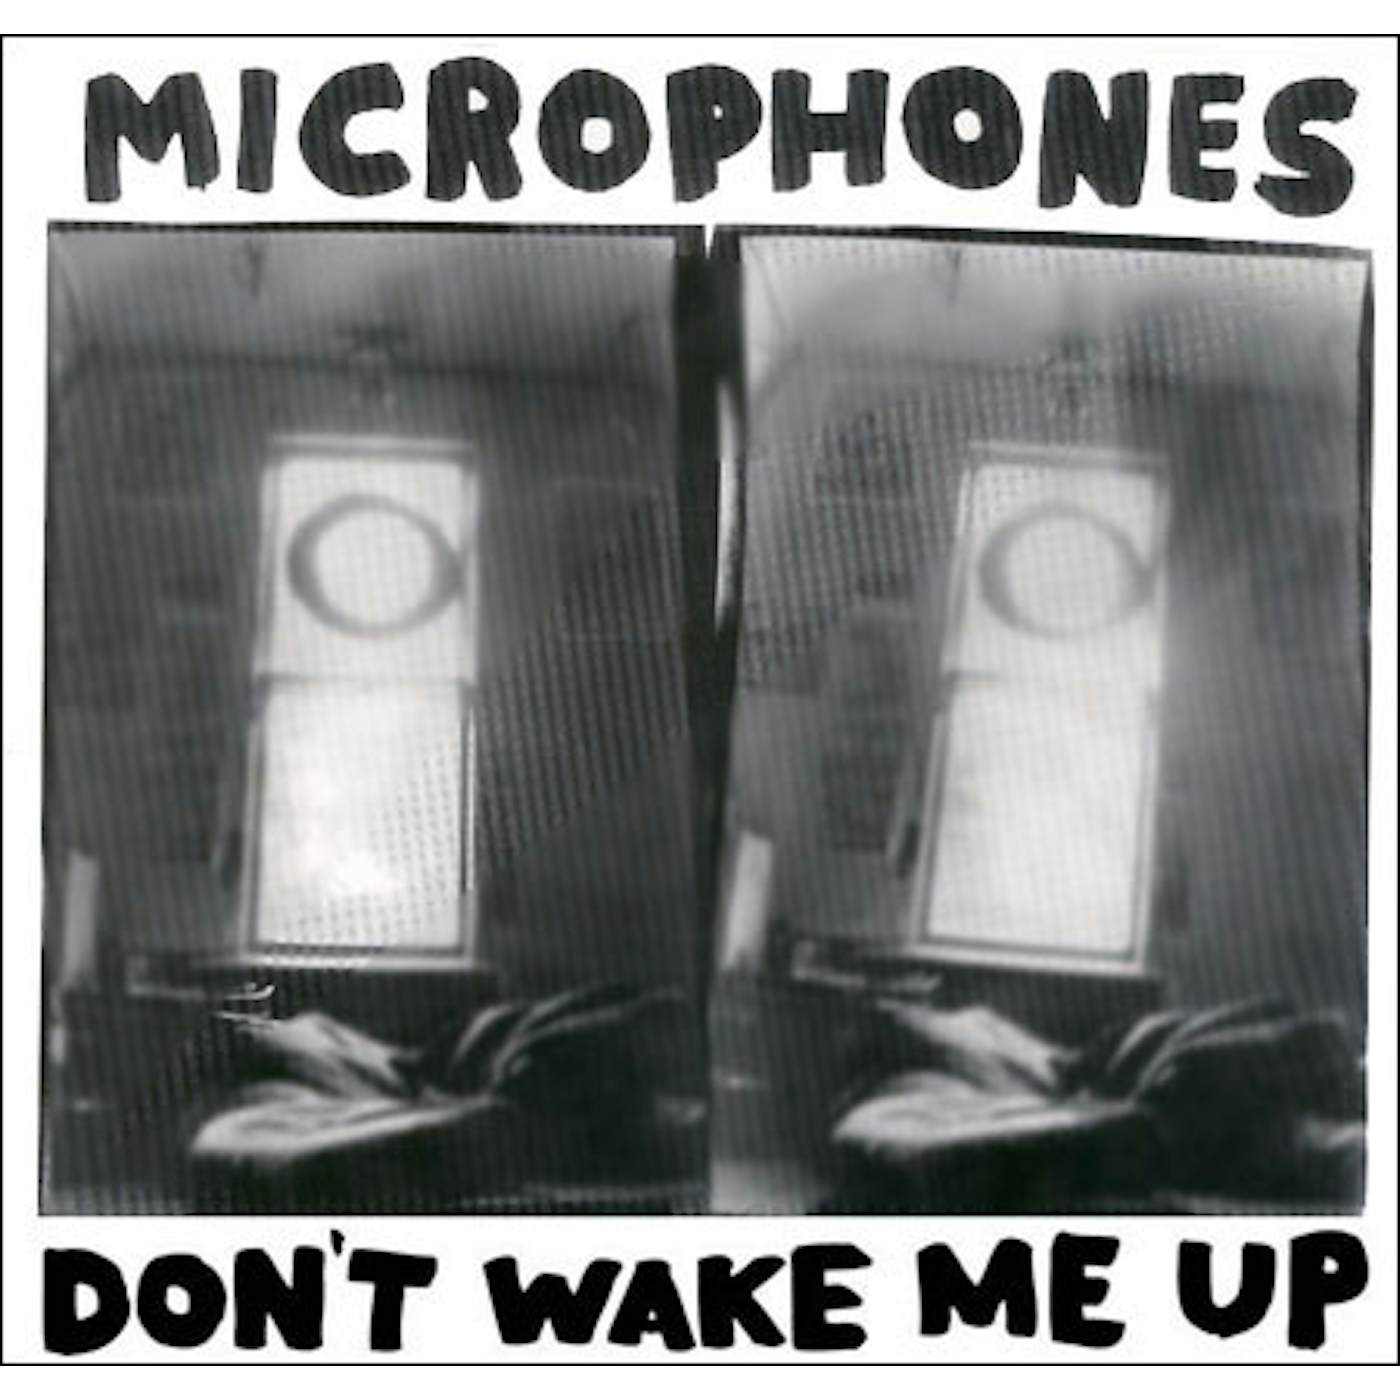 The Microphones Don't Wake Me Up Vinyl Record